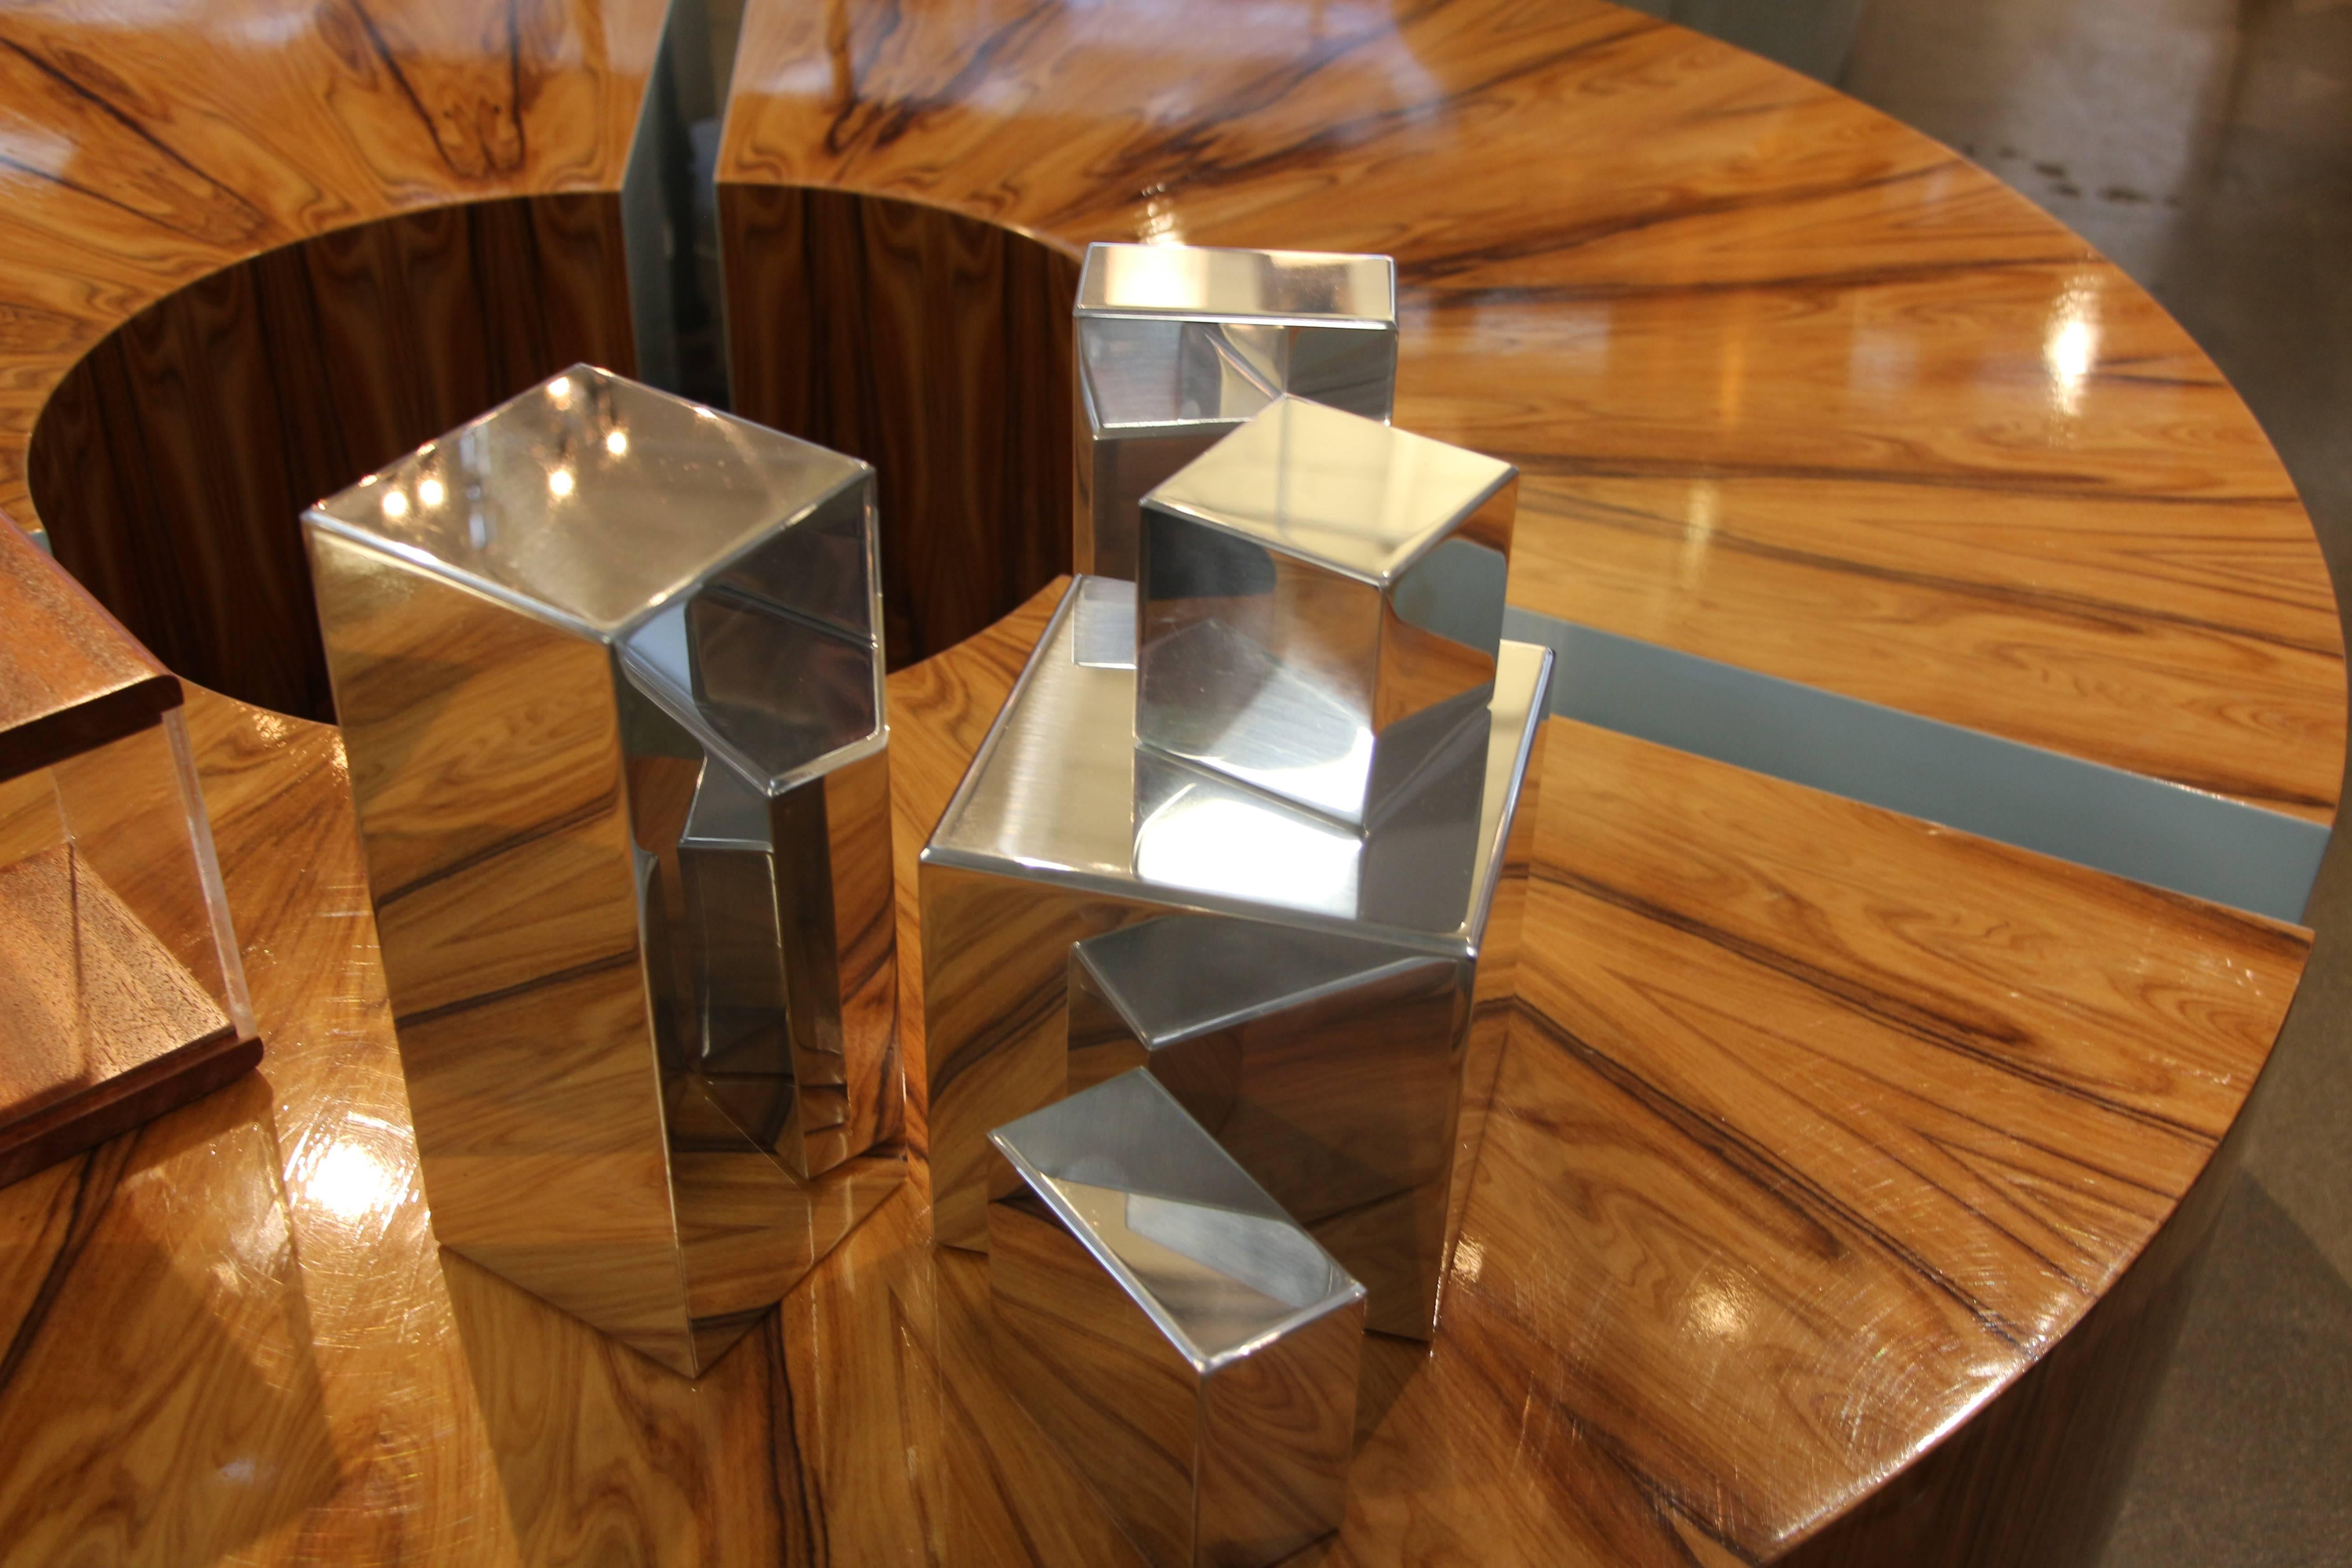 Our gallery is proud to represent an new talented artist Casey Cross who now resides in Palm Springs, CA. His work is unique and quite unusual. These geometric shapes can be arranged in any way. They are polished aluminum shapes. Each piece has been